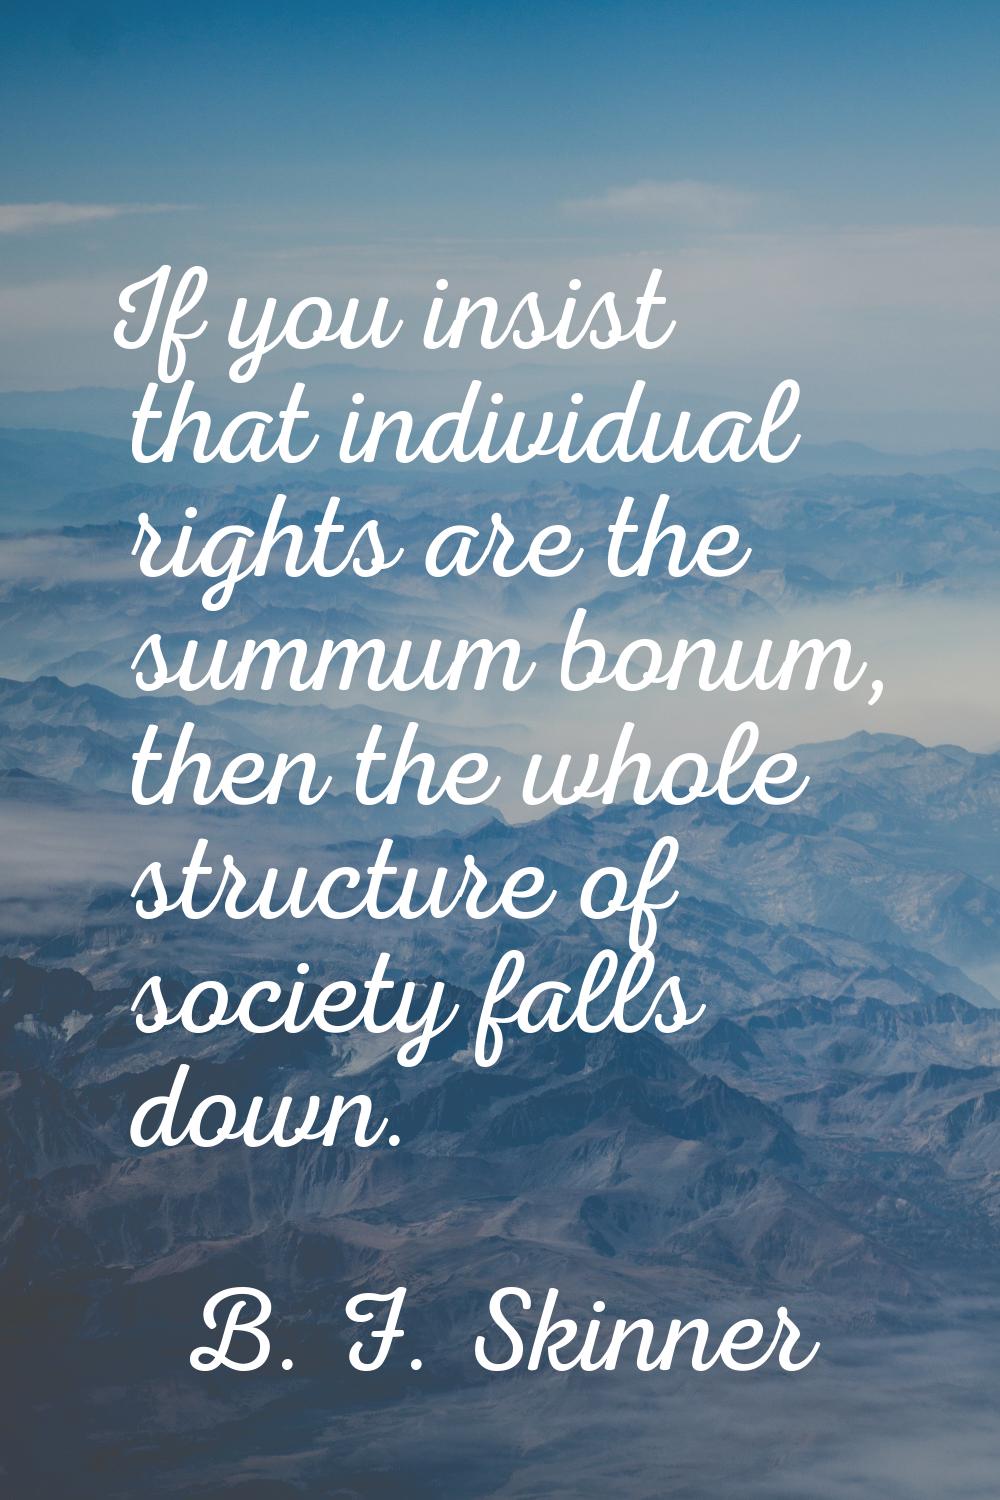 If you insist that individual rights are the summum bonum, then the whole structure of society fall